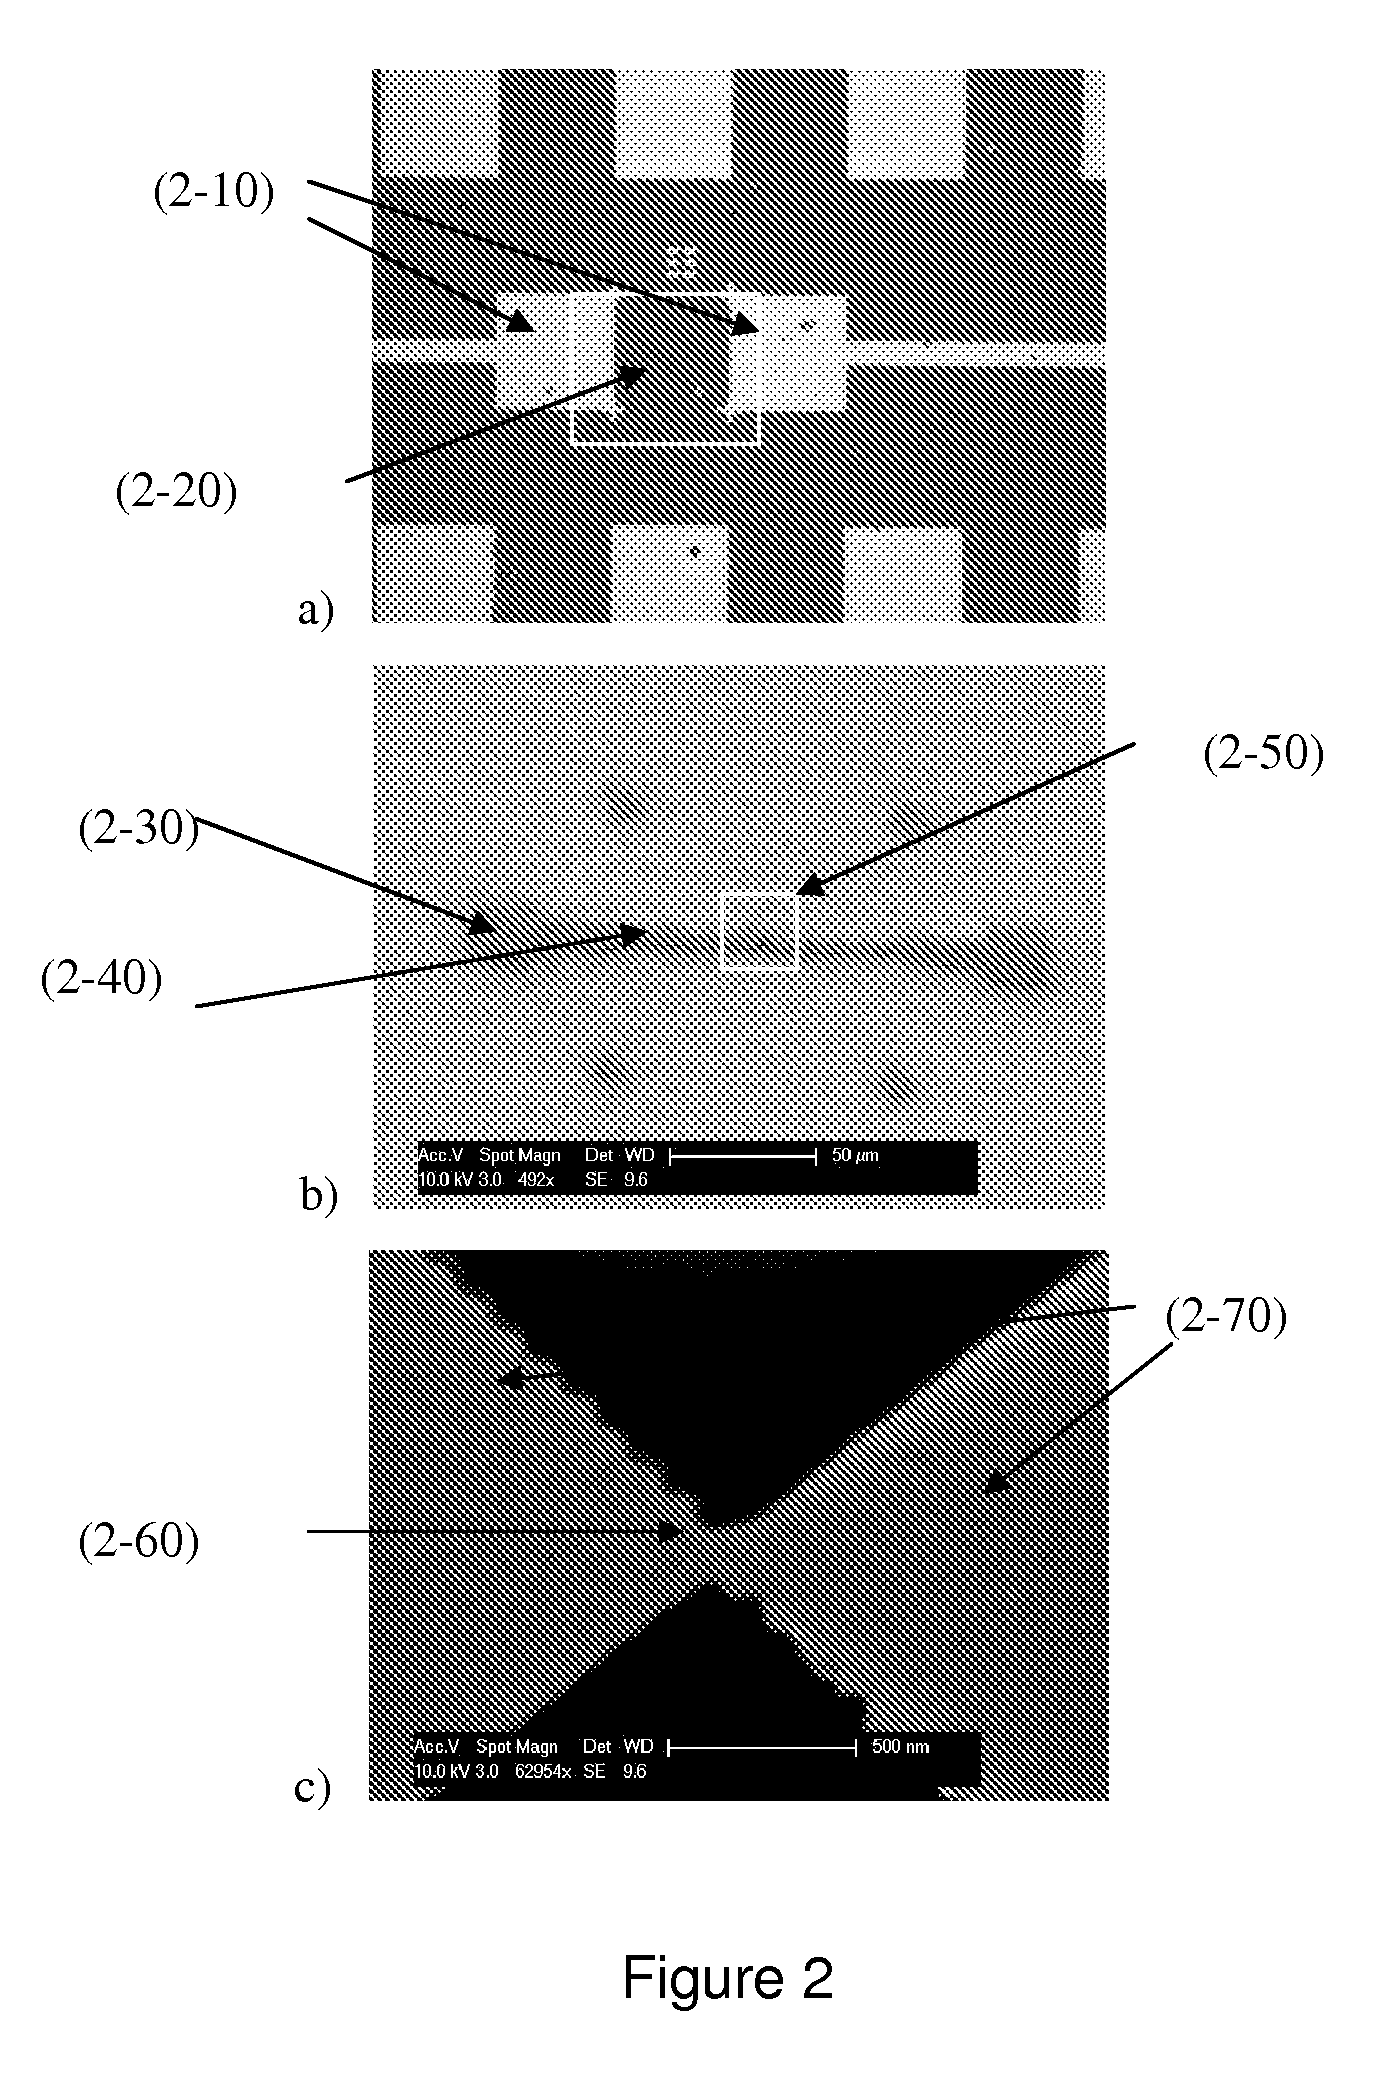 Insulated nanogap devices and methods of use thereof